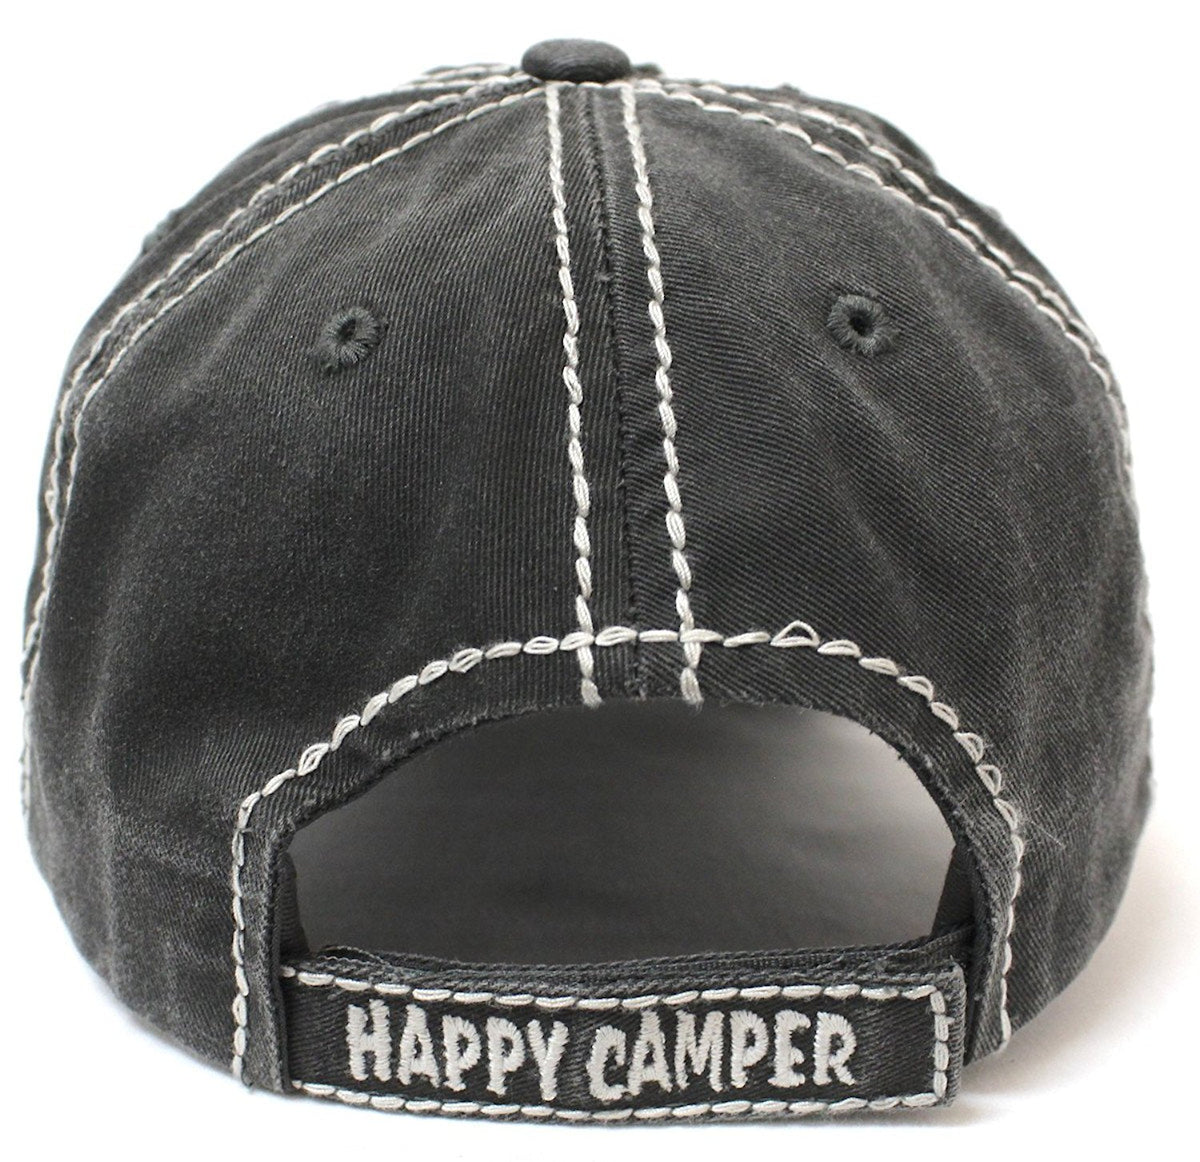 CAPS 'N VINTAGE Women's Happy Camper Camp Fire Patch Embroidery Baseball Hat-Blk/Blue - Caps 'N Vintage 